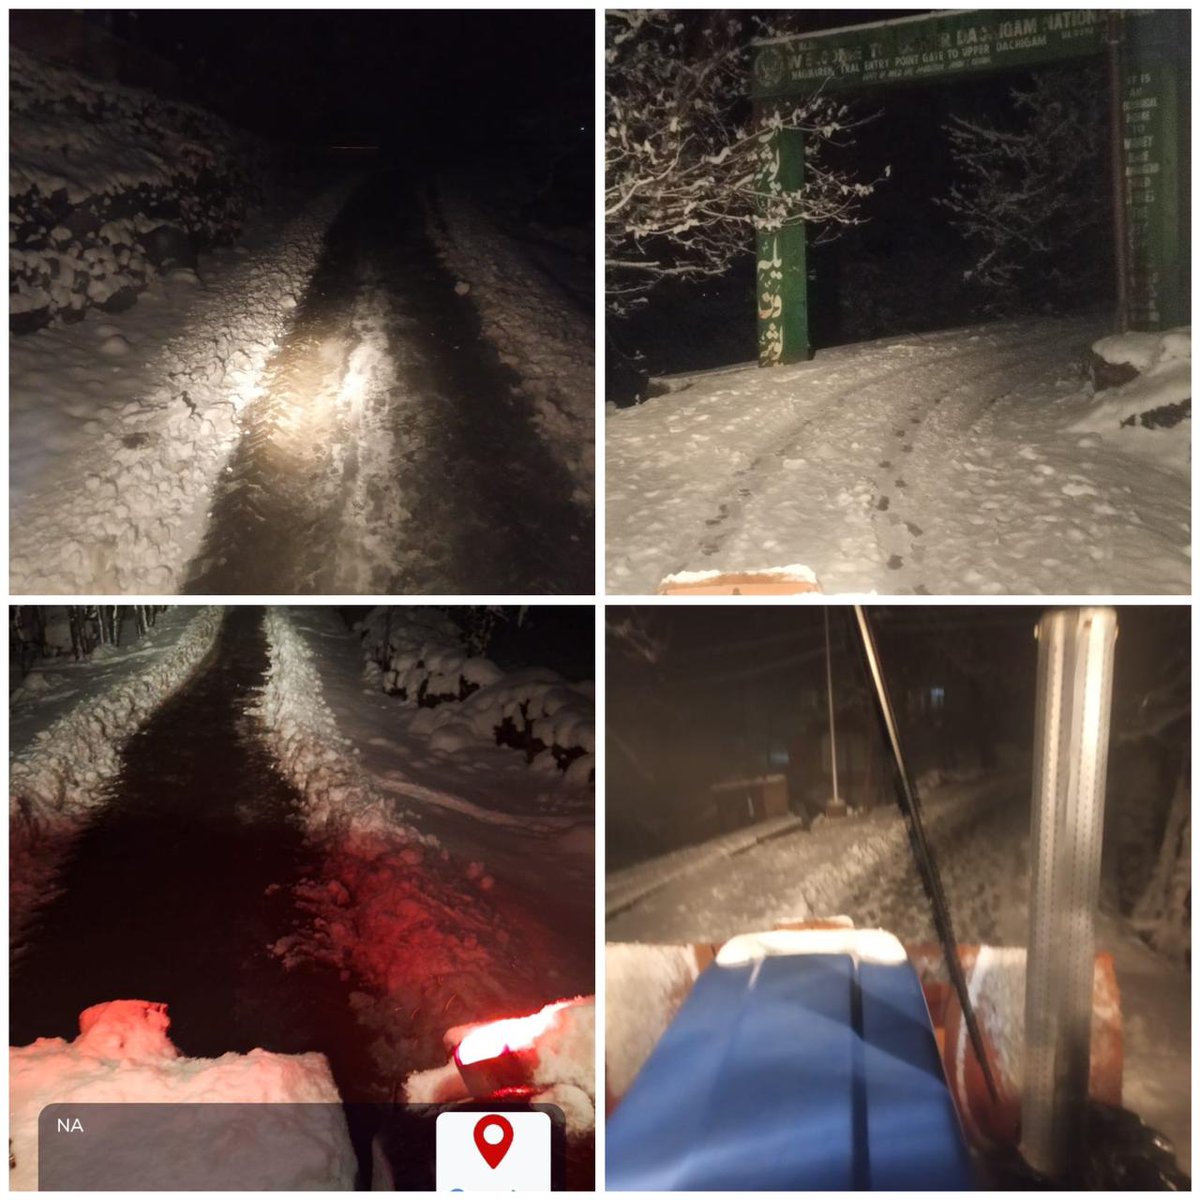 The Night champions of #snowclearance continue undettered, committed to reach last mile. Word of appreciation for all. @basharatias_dr @ddnewsSrinagar @DicPulwama @diprjk @PIBSrinagar